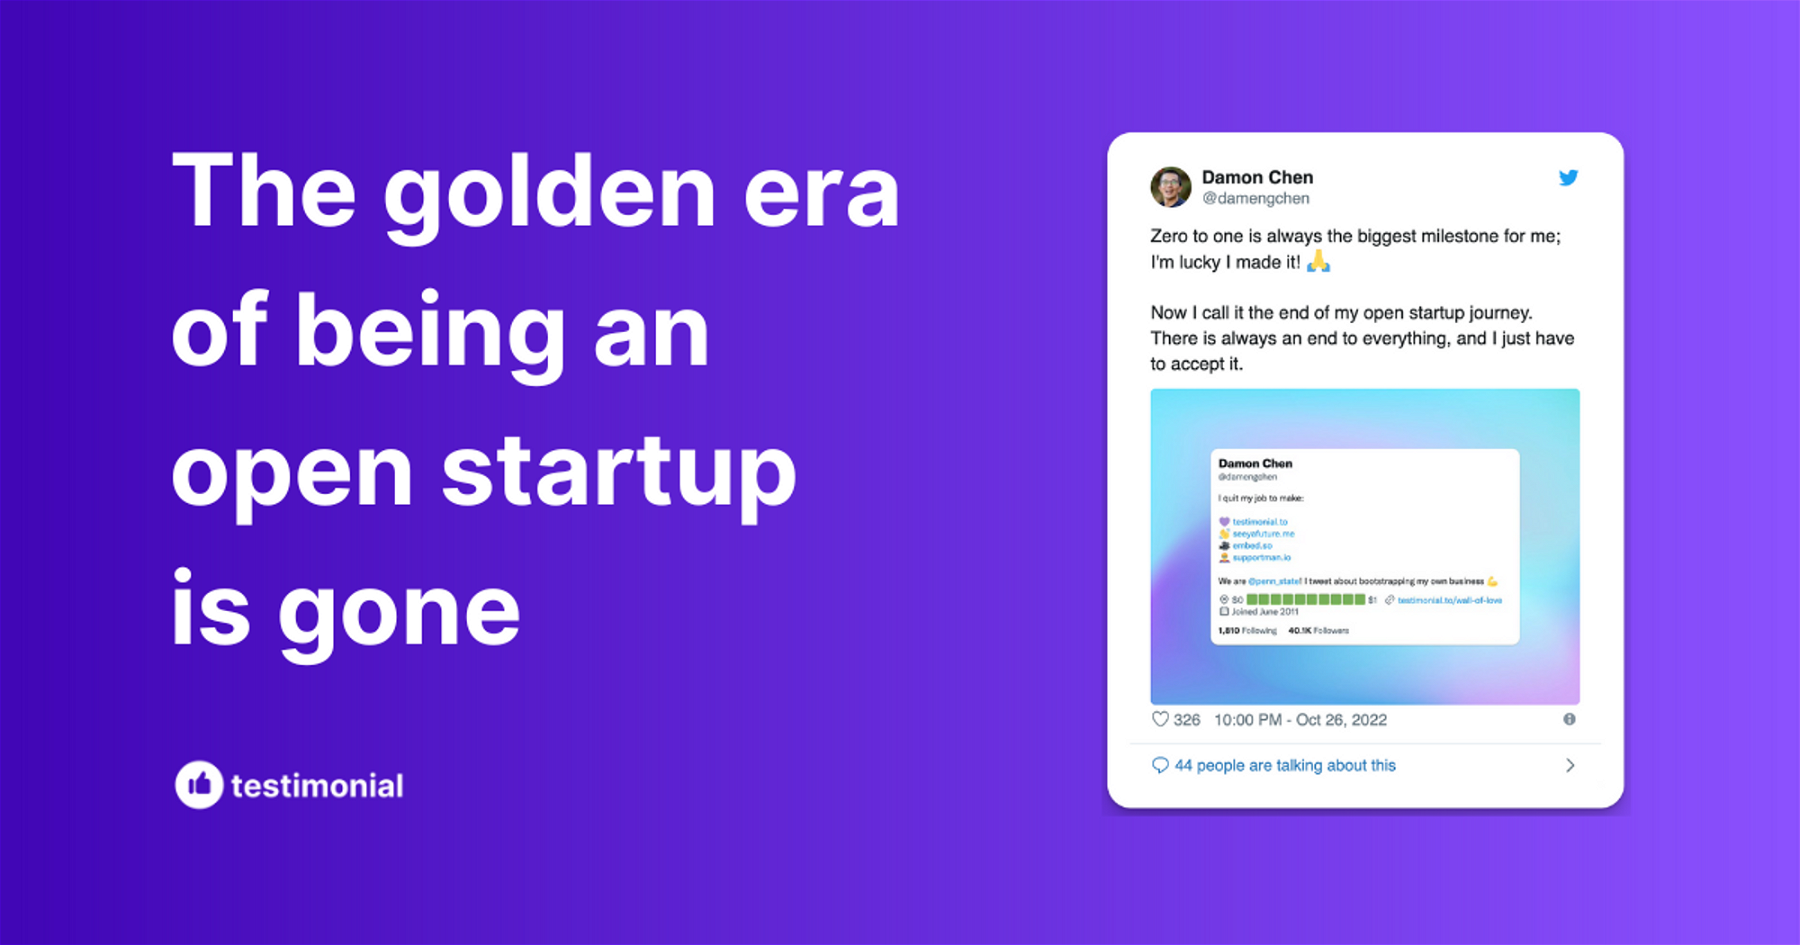 The golden era of being an open startup is gone